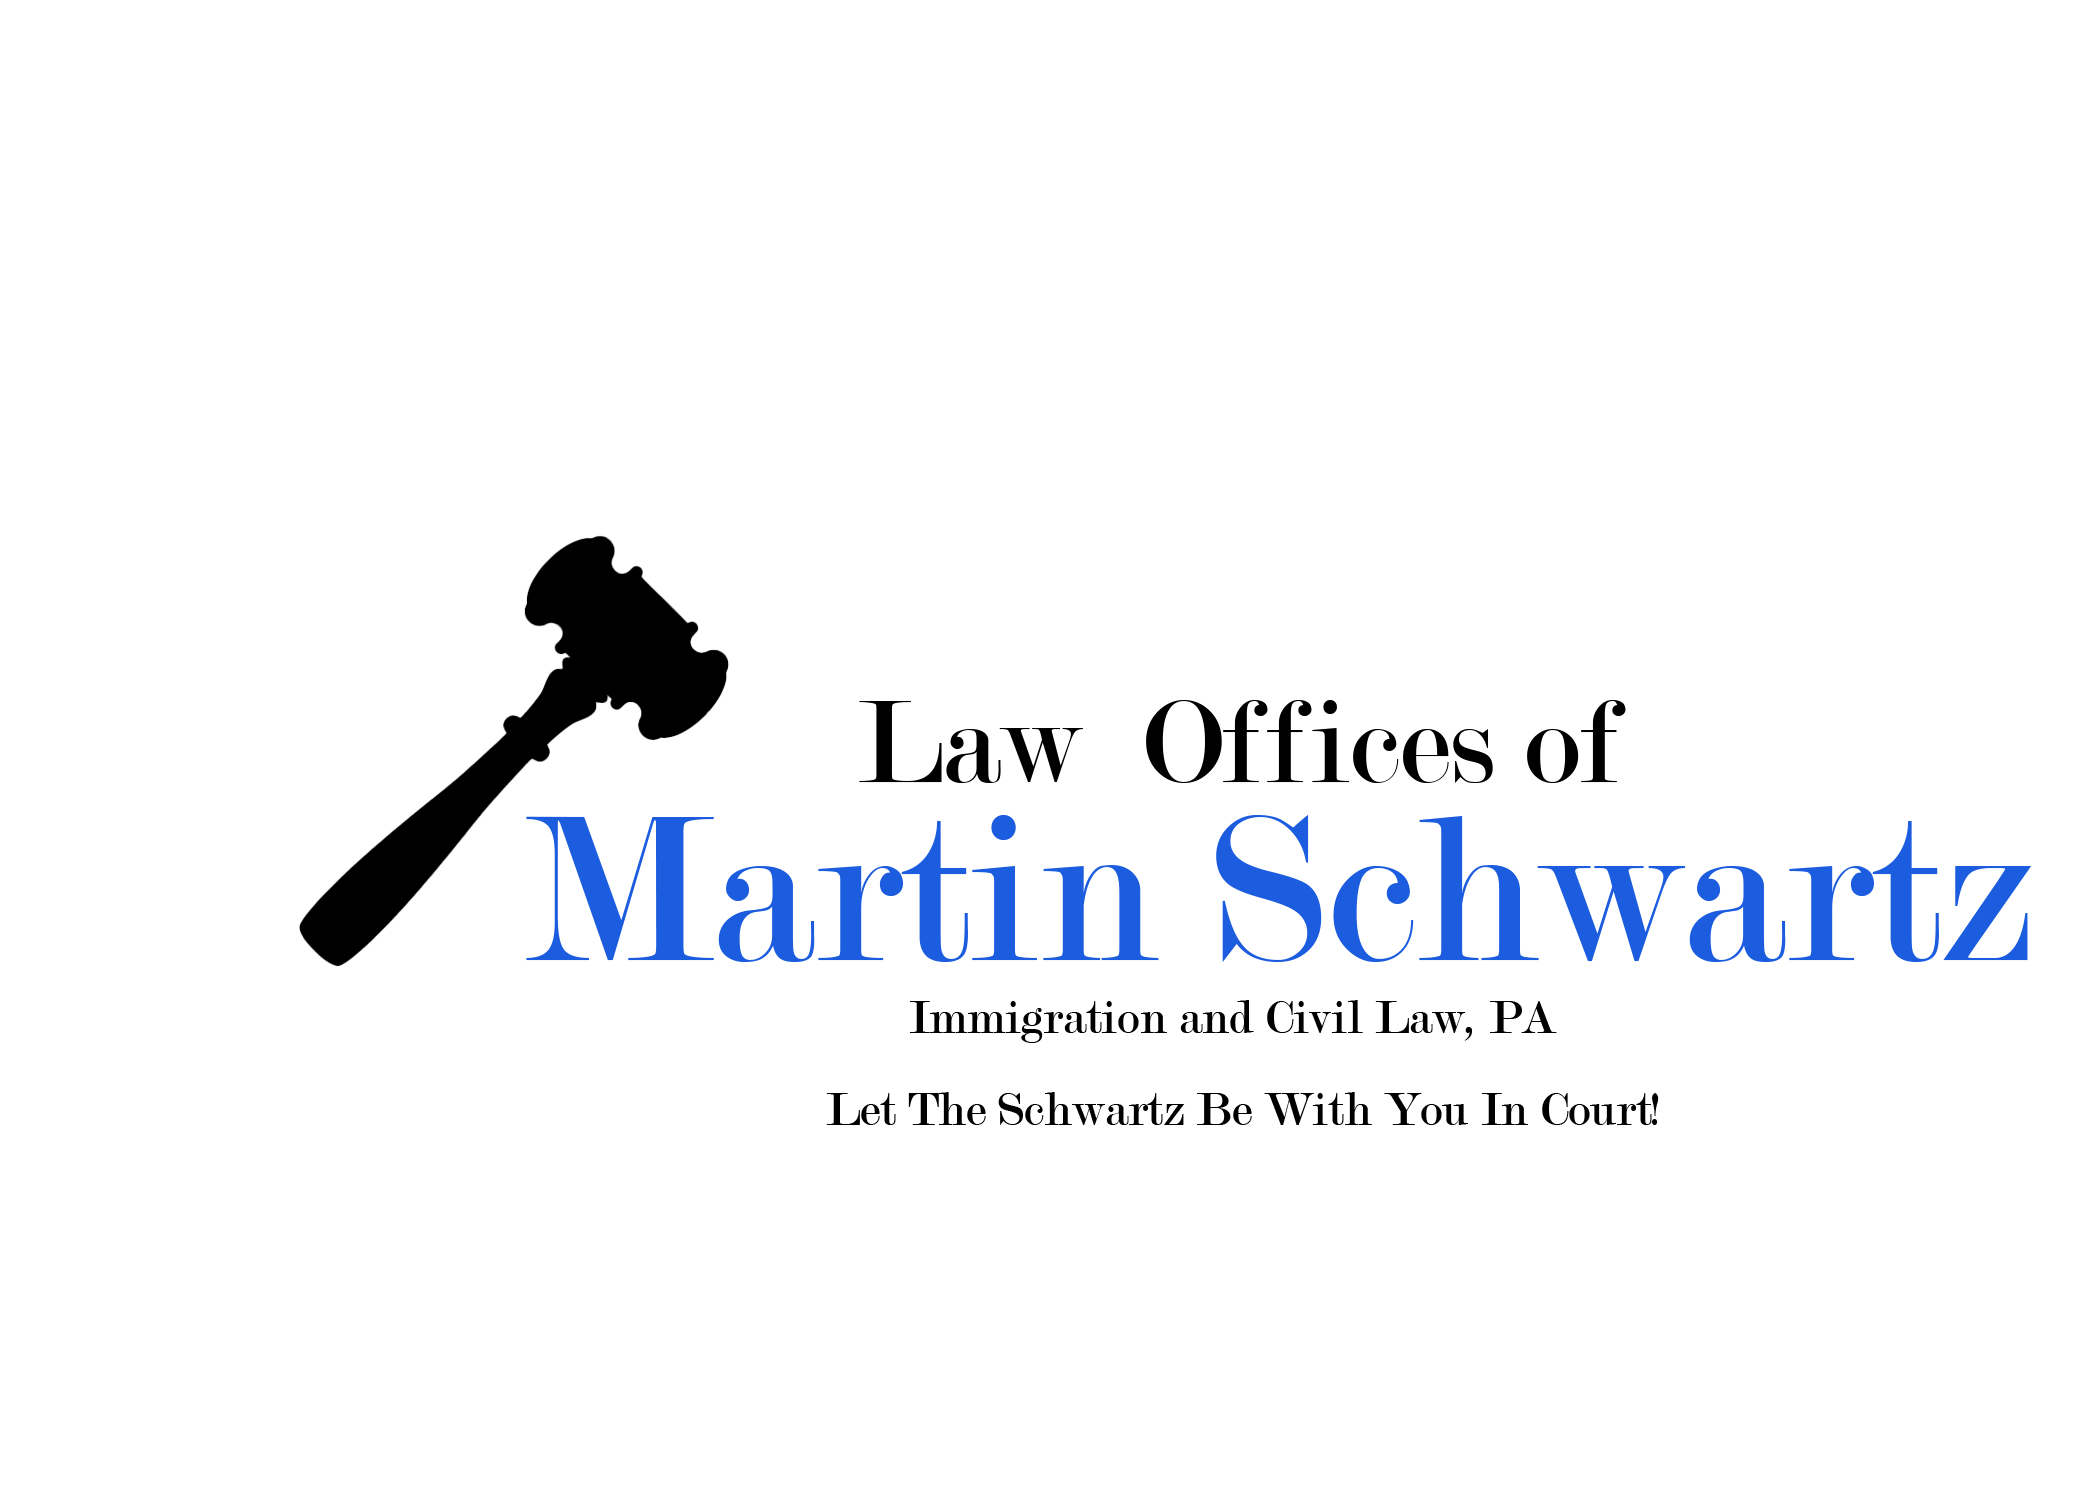 The Law Offices of Martin B. Schwartz